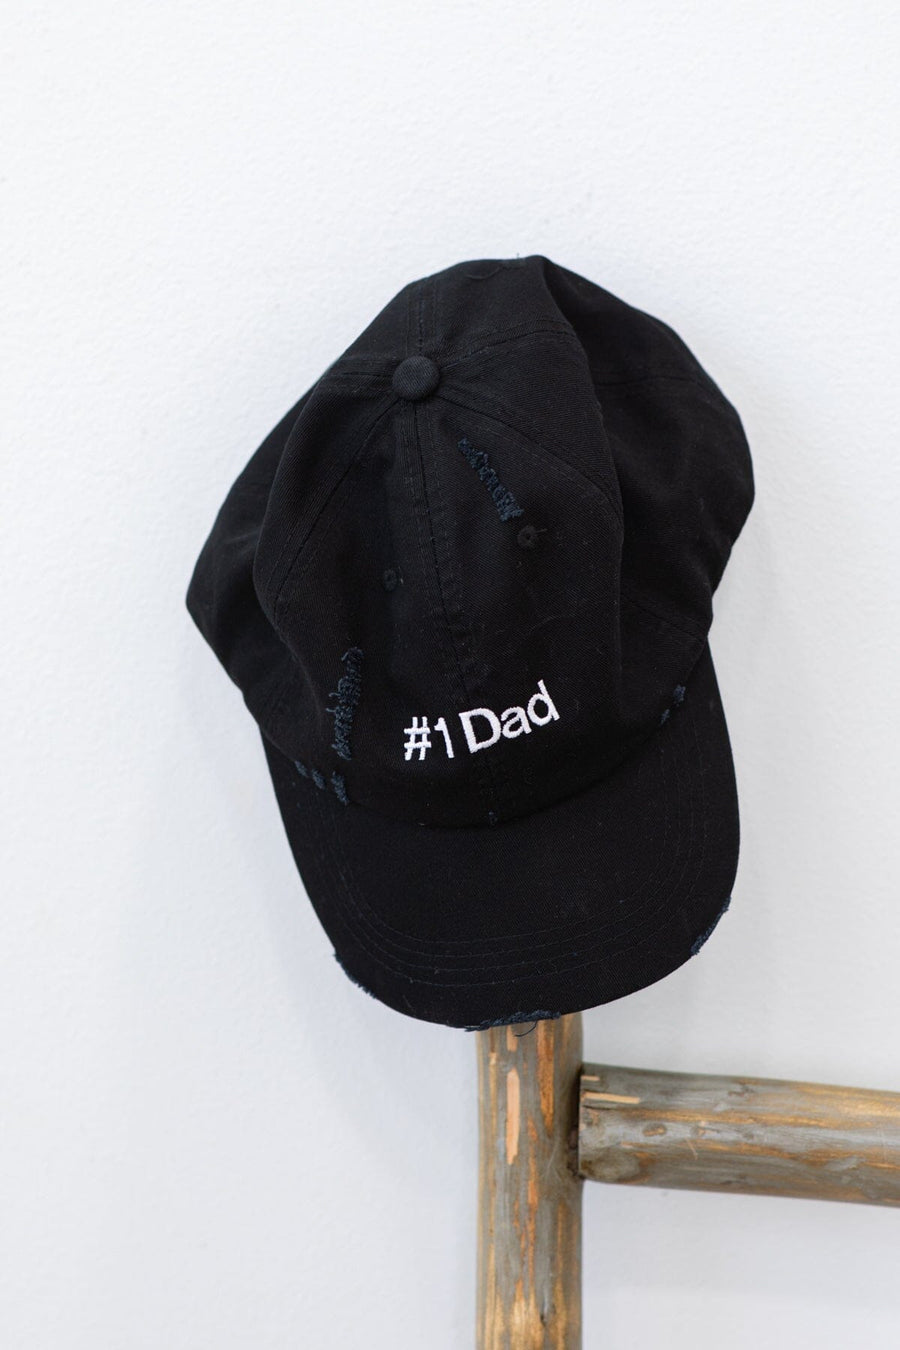 Black #1 Dad Embroidered Baseball Hat - Filly Flair